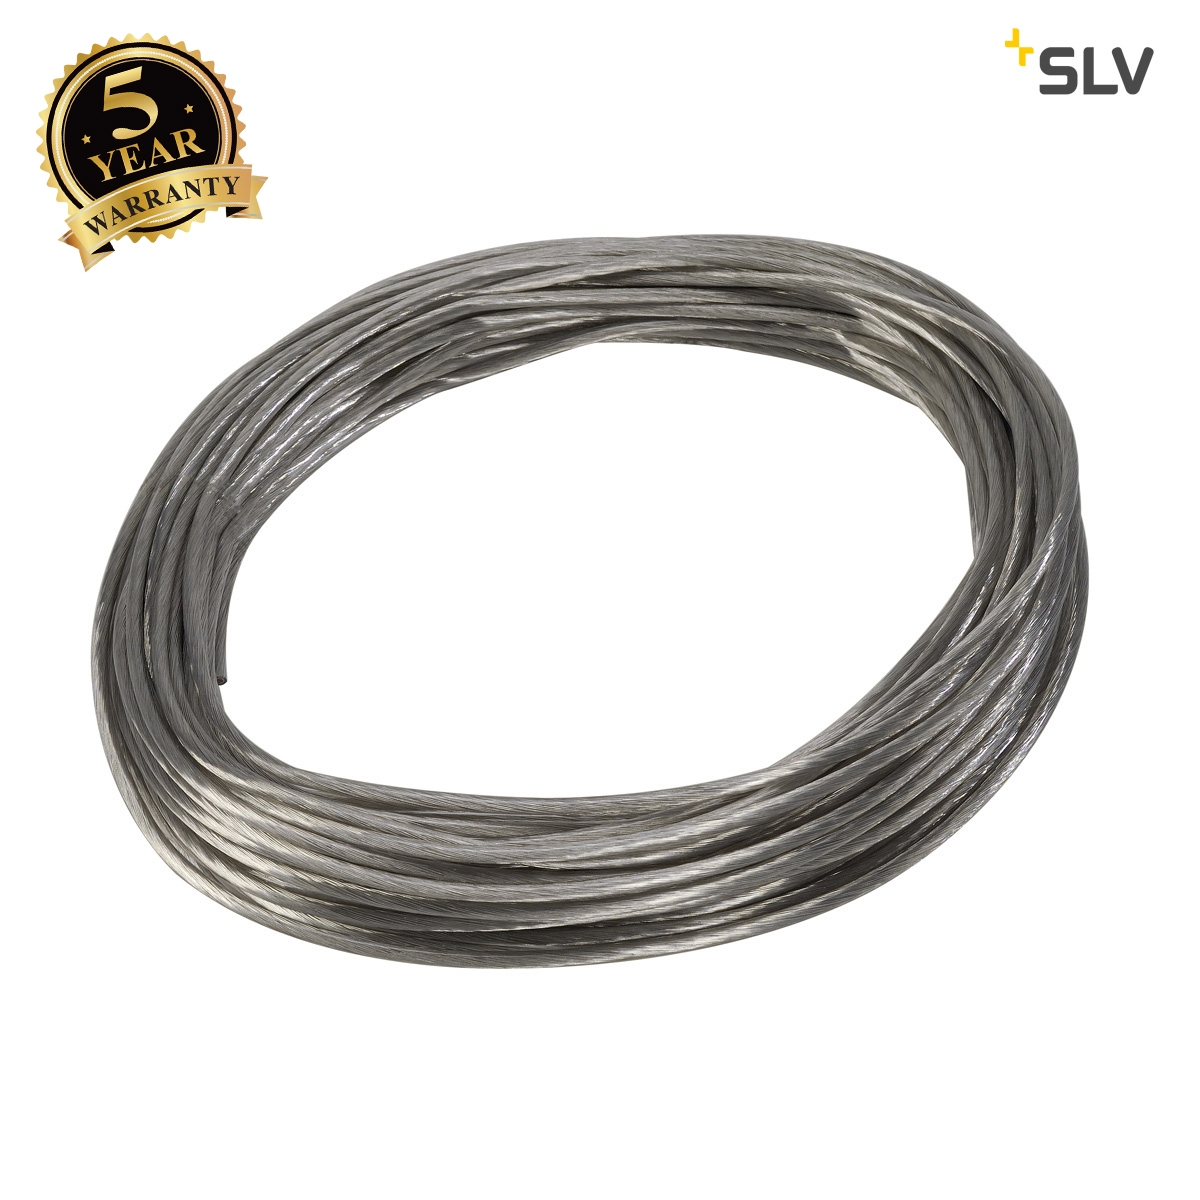 SLV Low-voltage wire, insulated, 4mm², 1m 139024